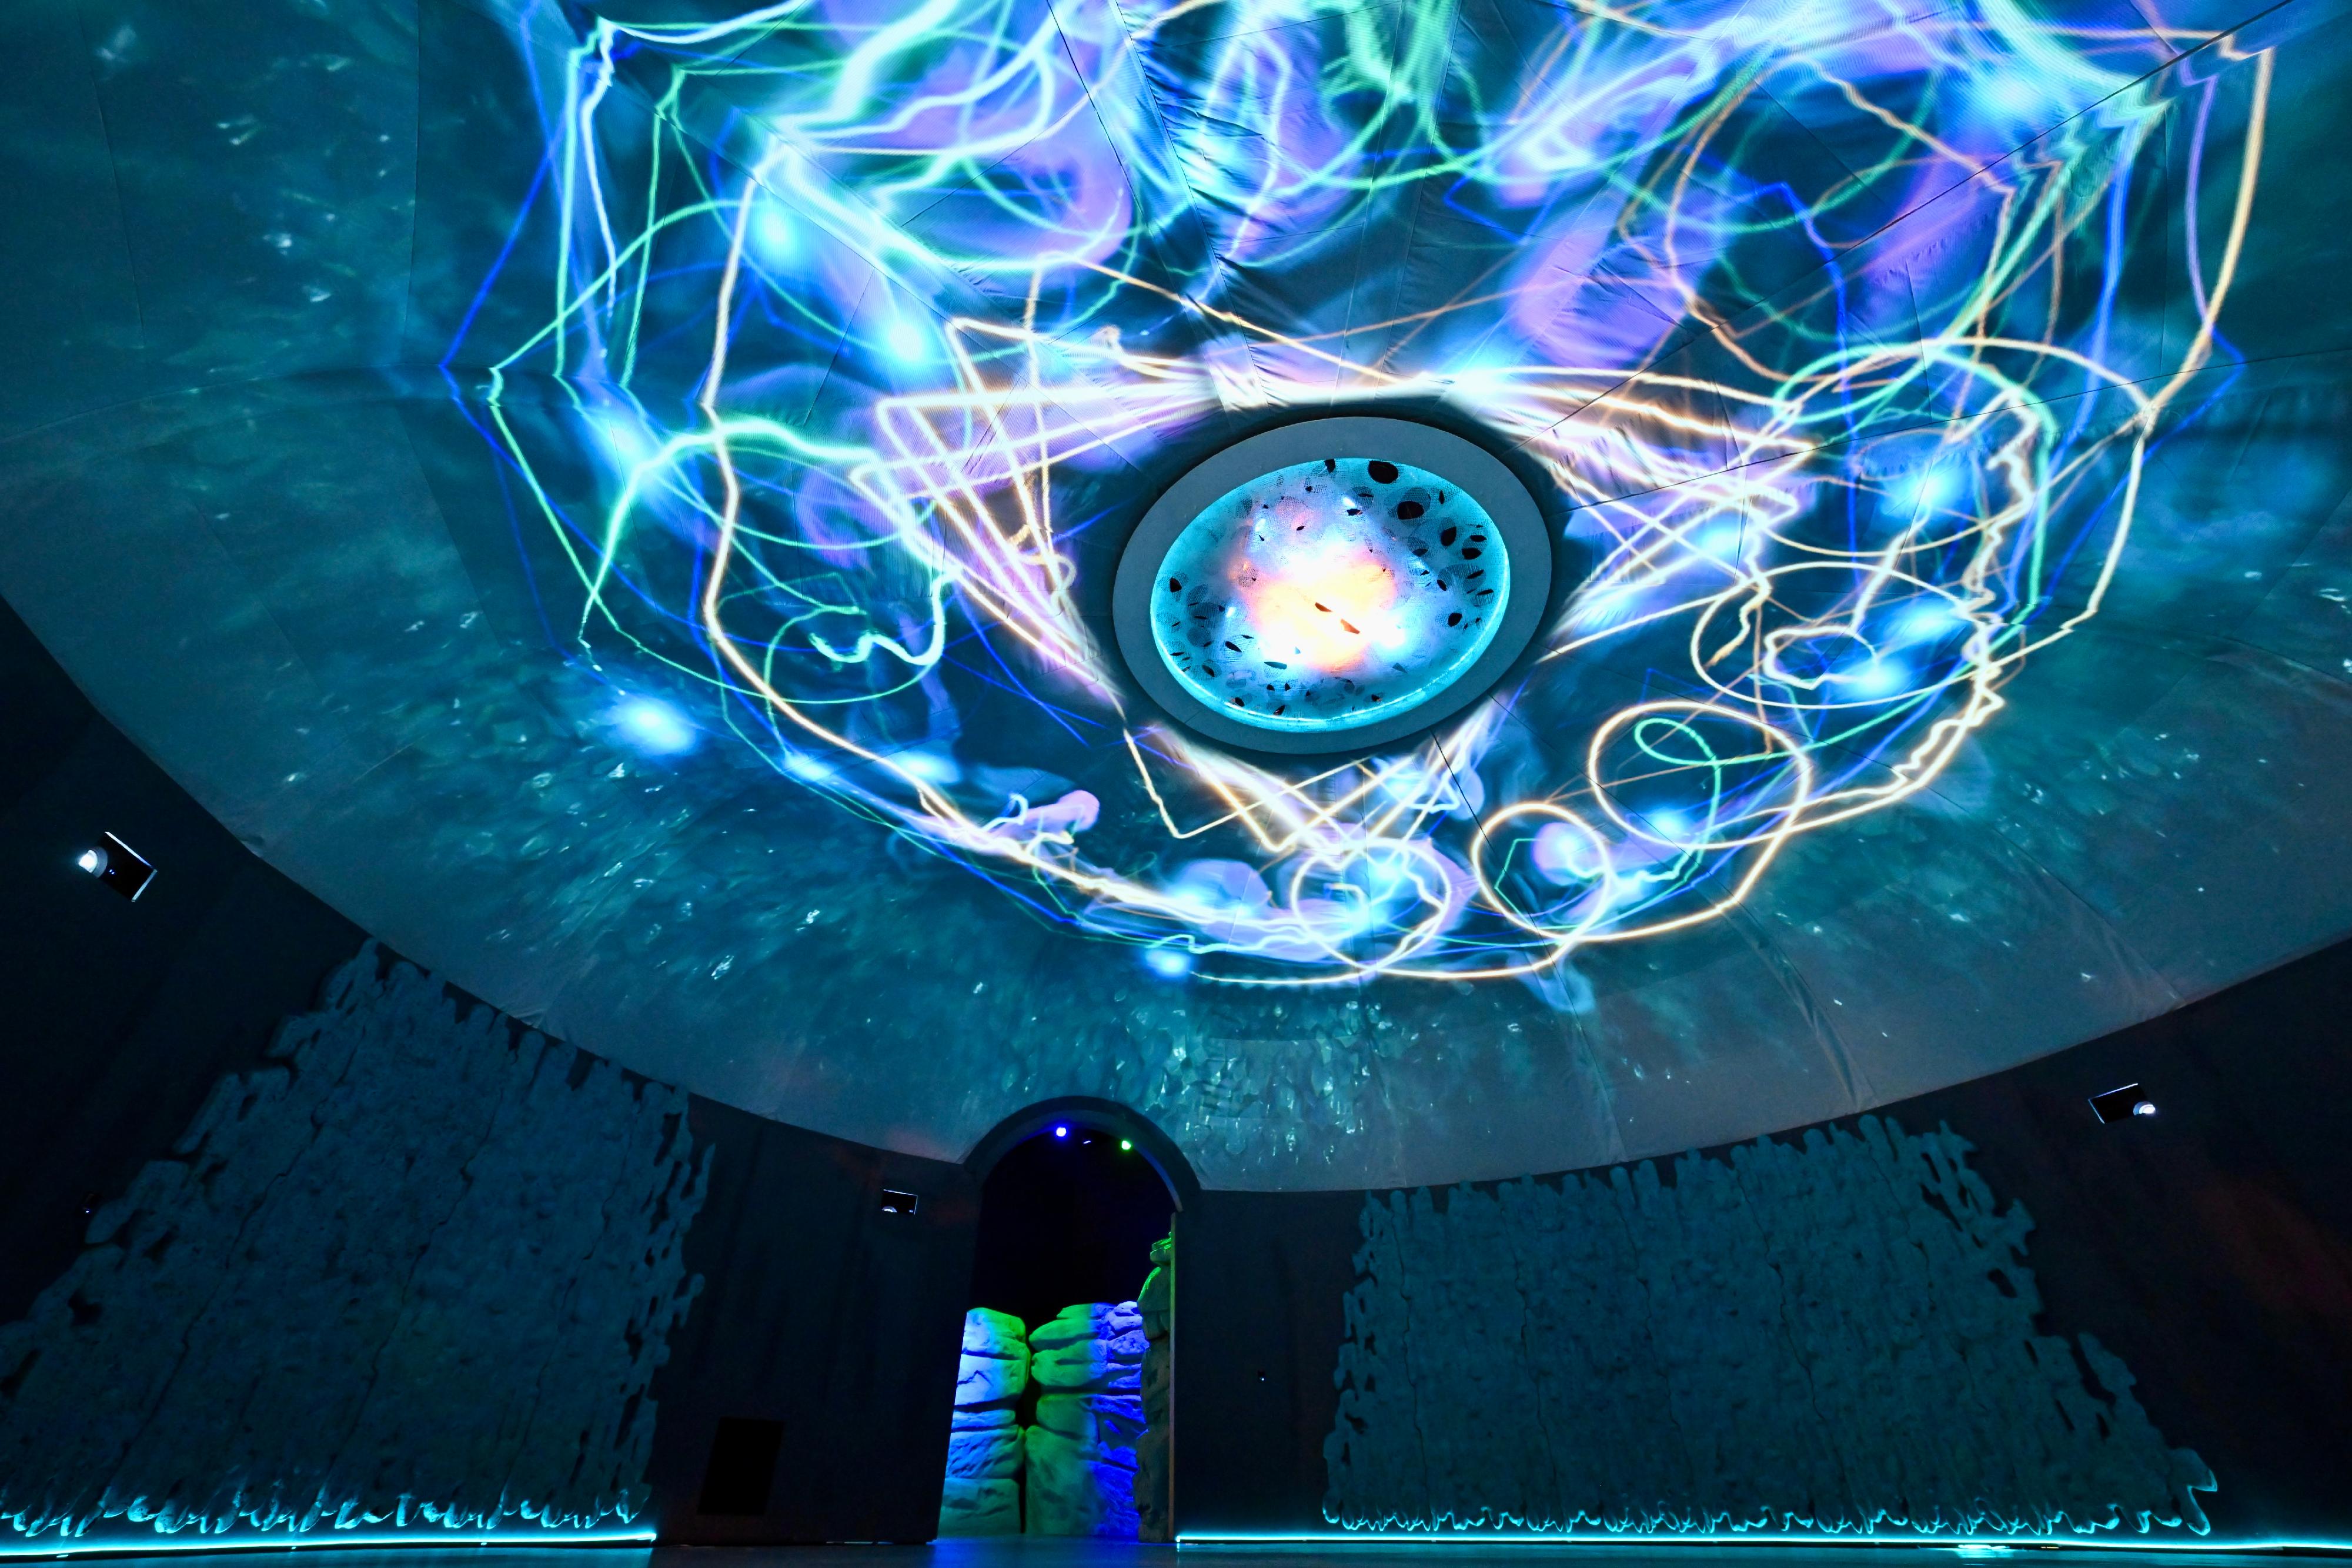 The Hong Kong Science Museum will launch a new special exhibition, "Science Fiction: Voyage to the Edge of Imagination", tomorrow (December 15). Visitors can communicate with the creature on a sentient planet through an interactive stimulation installation.  